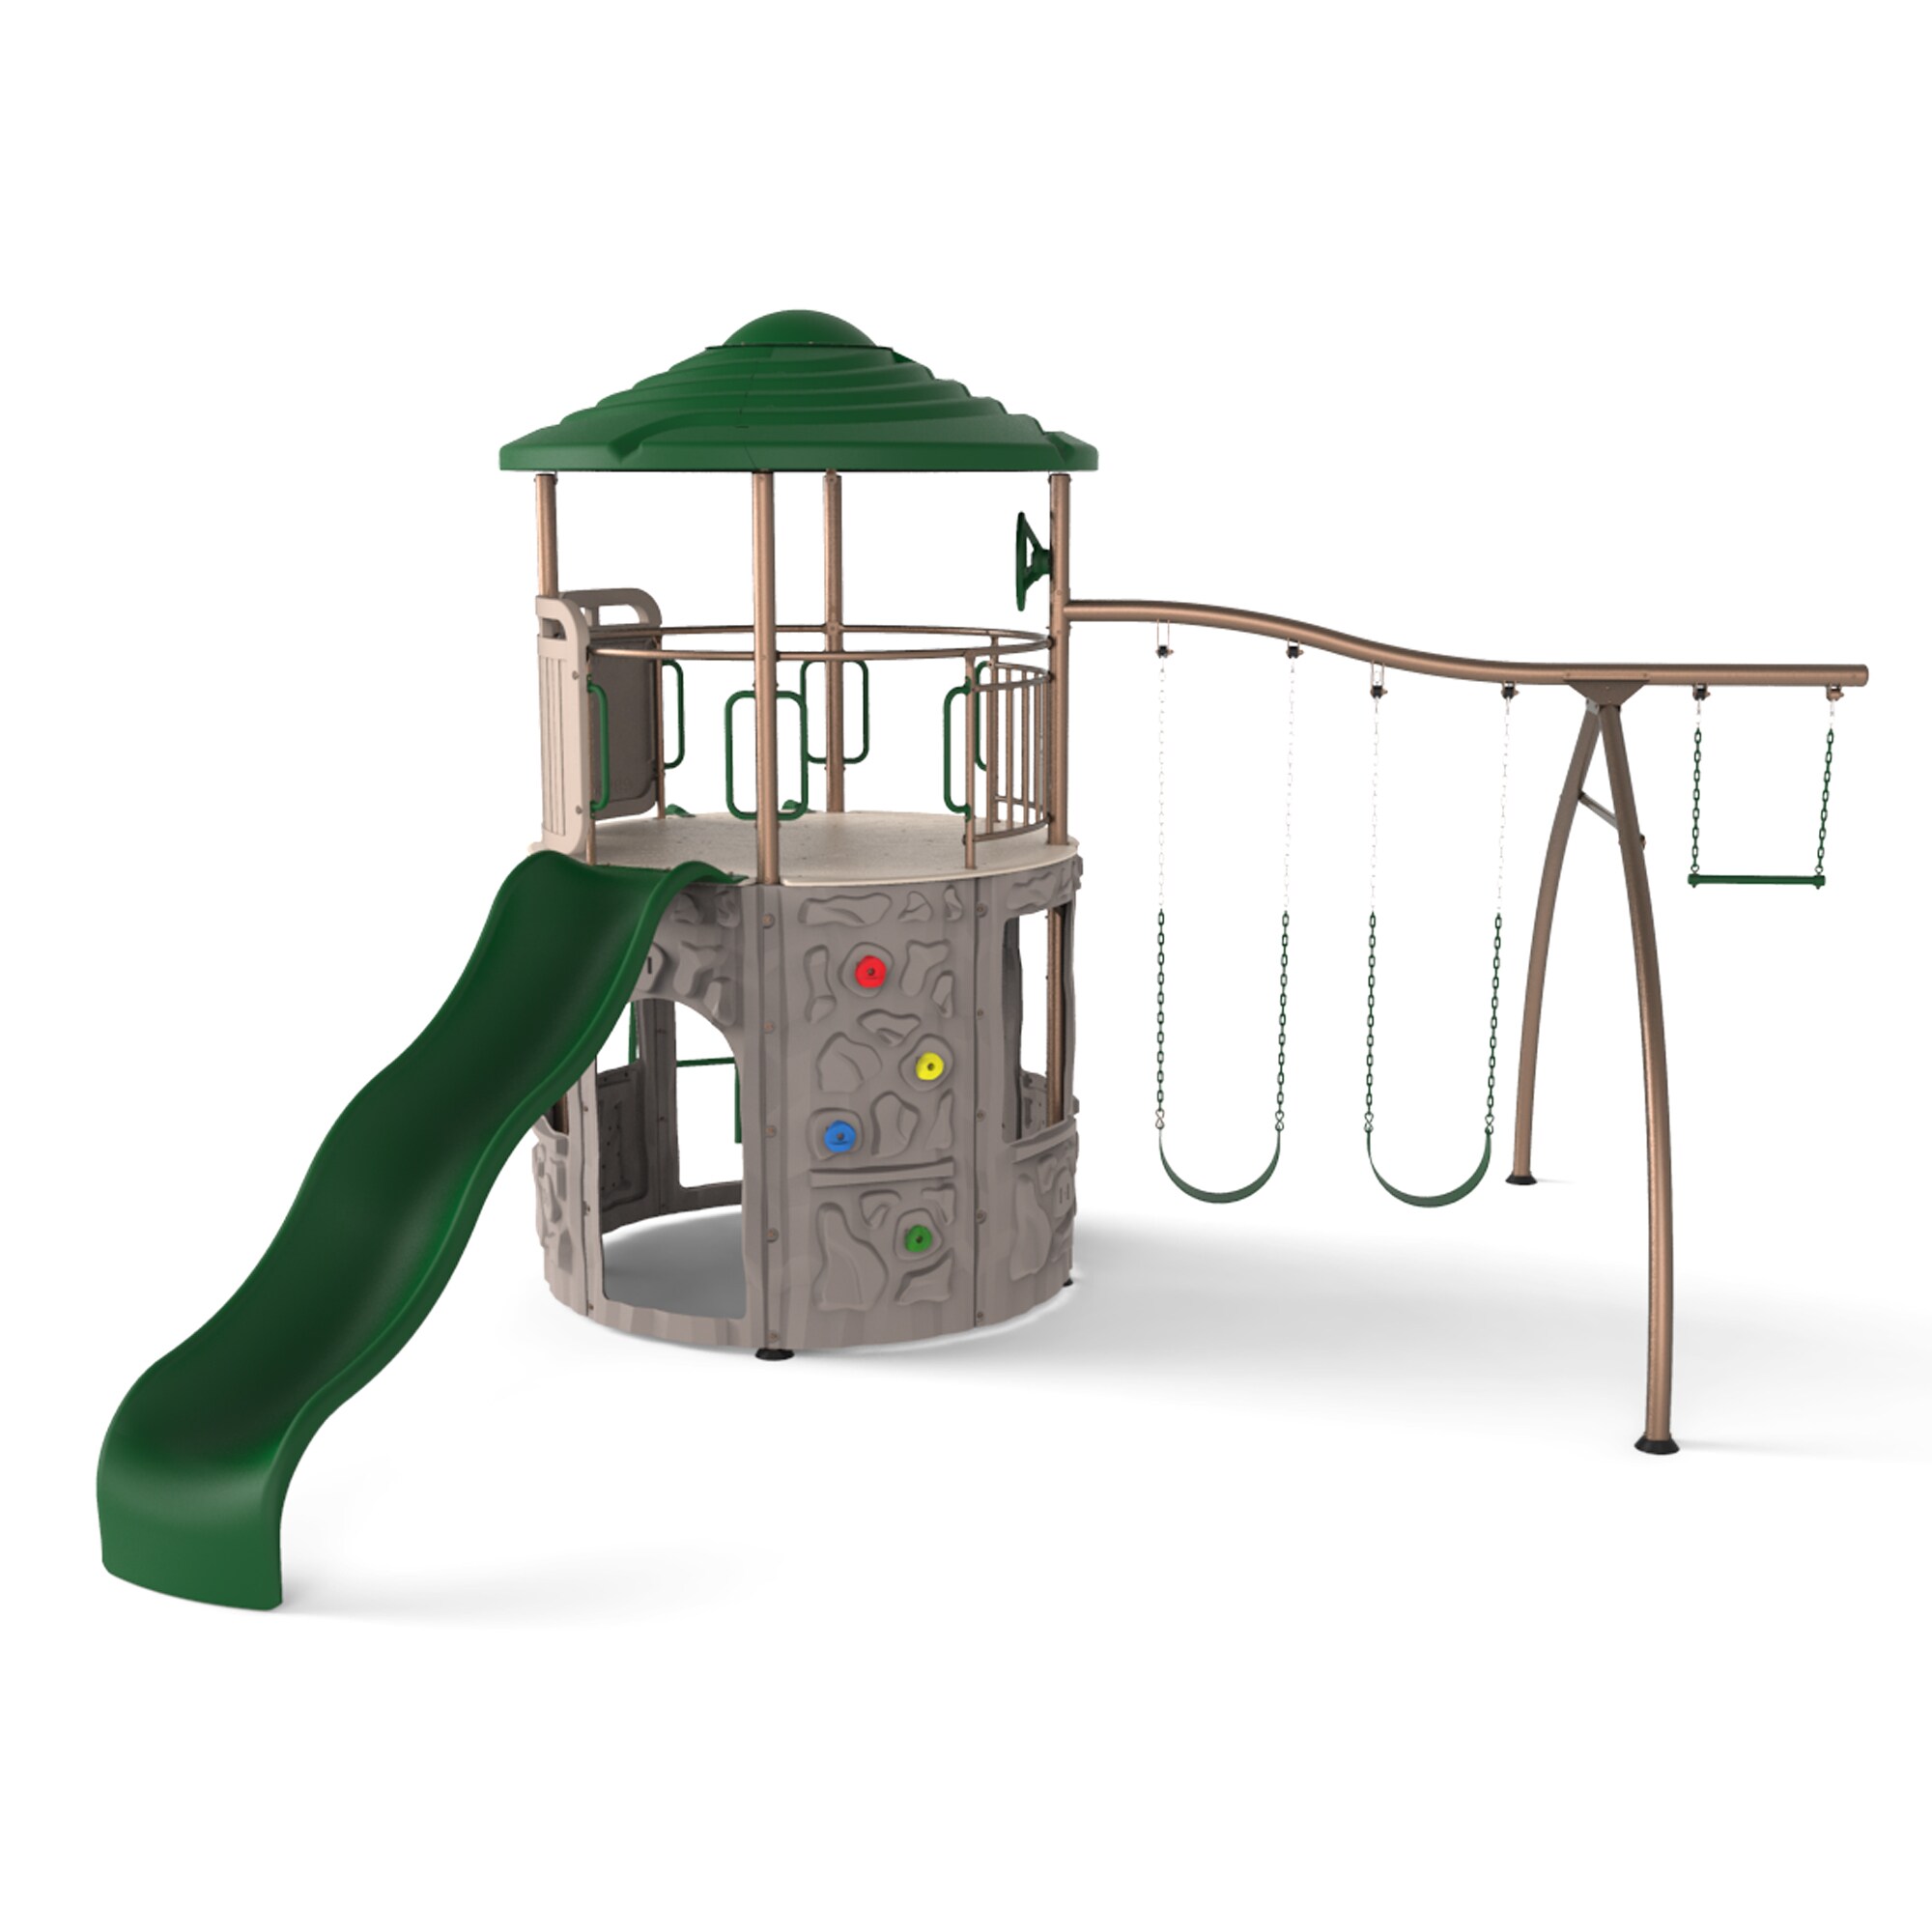 LIFETIME PRODUCTS Adventure Tower Metal Playset with Swings at Lowes.com